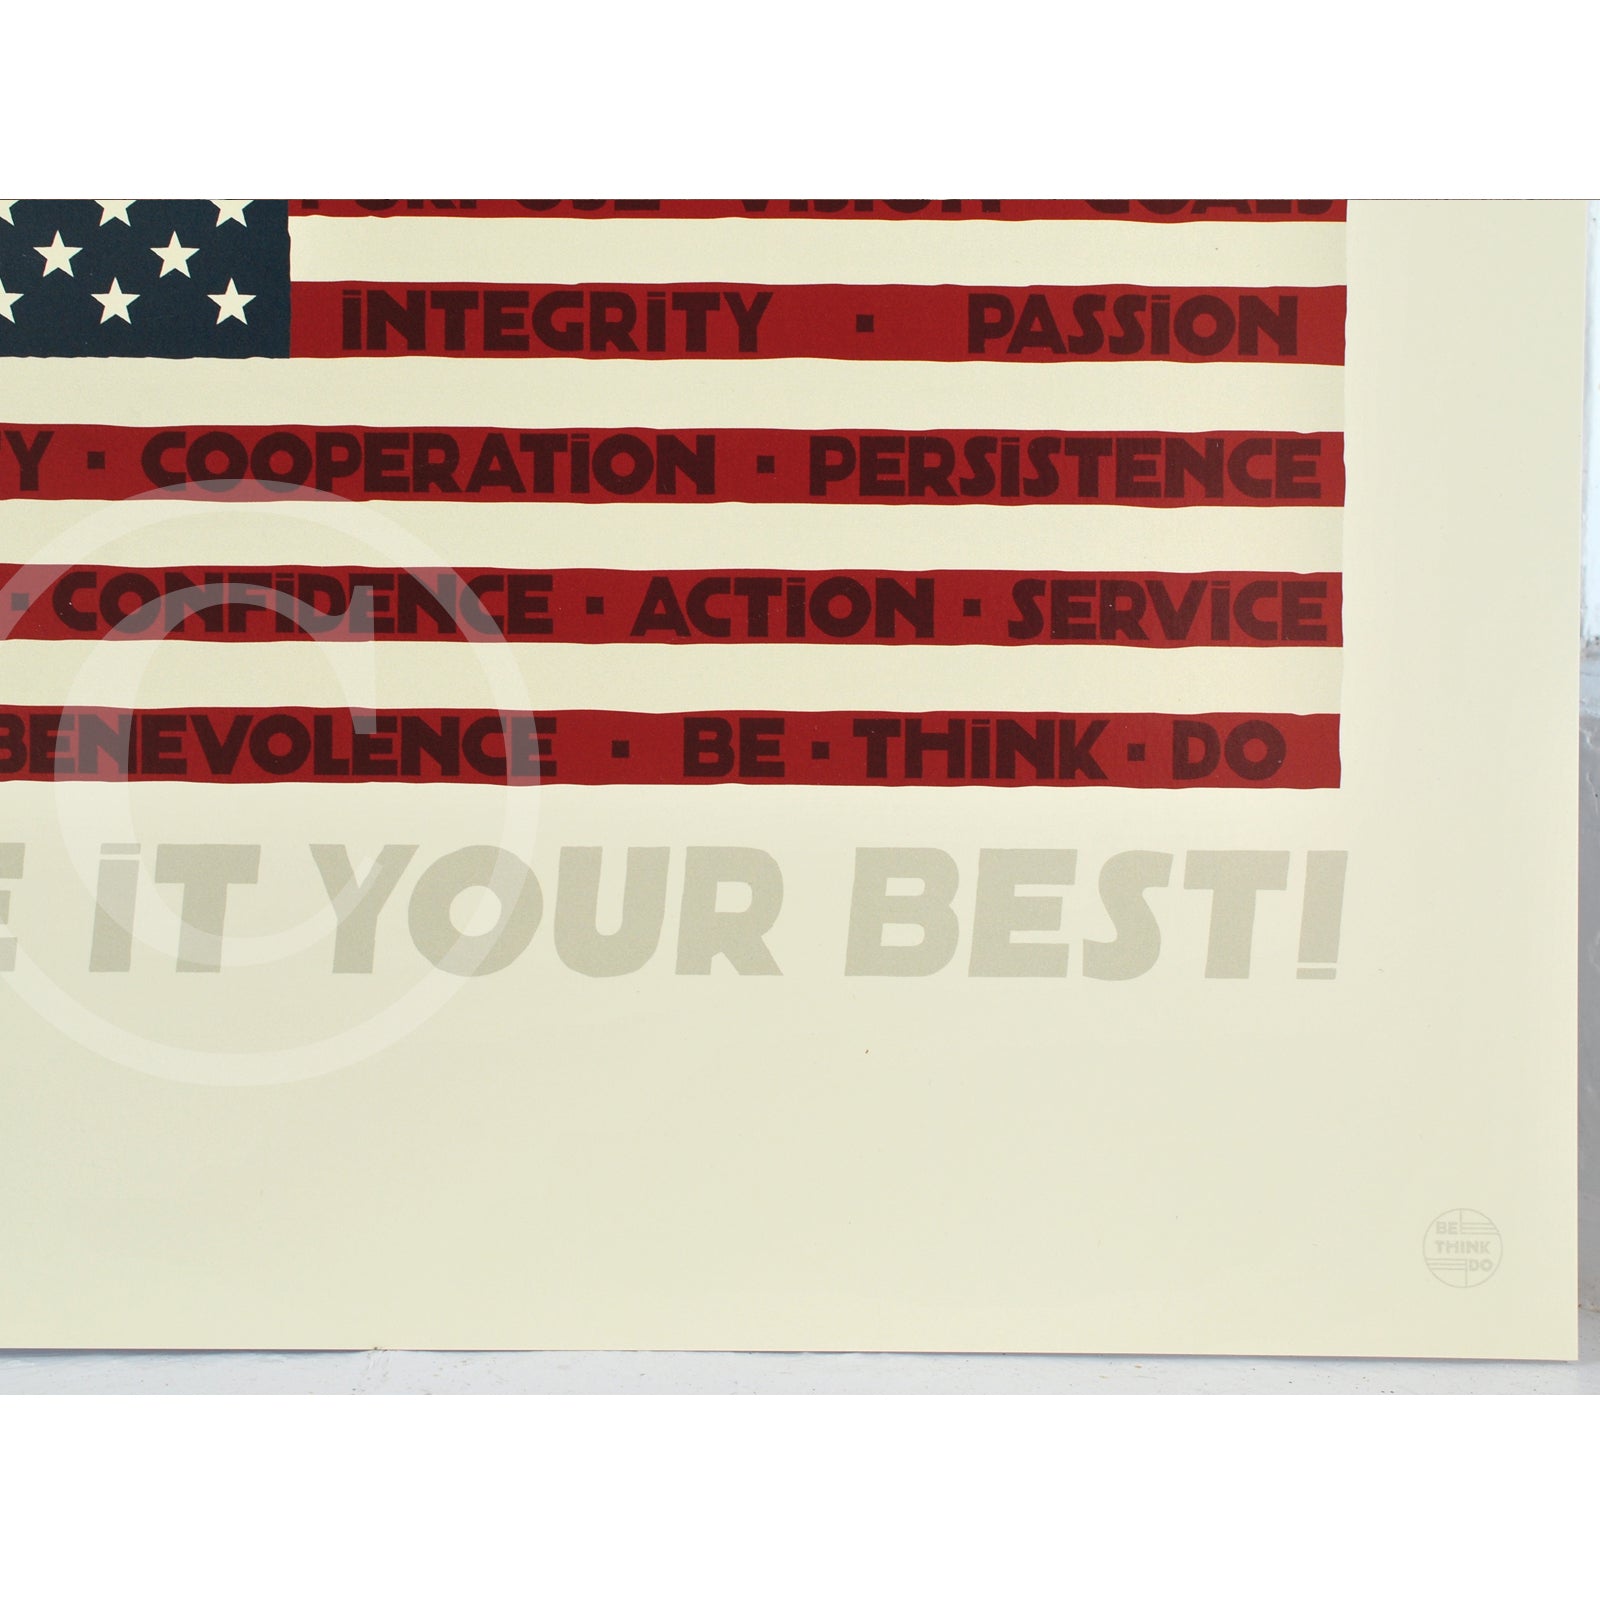 GIVE IT YOUR BEST! USA Flag Art Print 8" x 10" Wall Poster